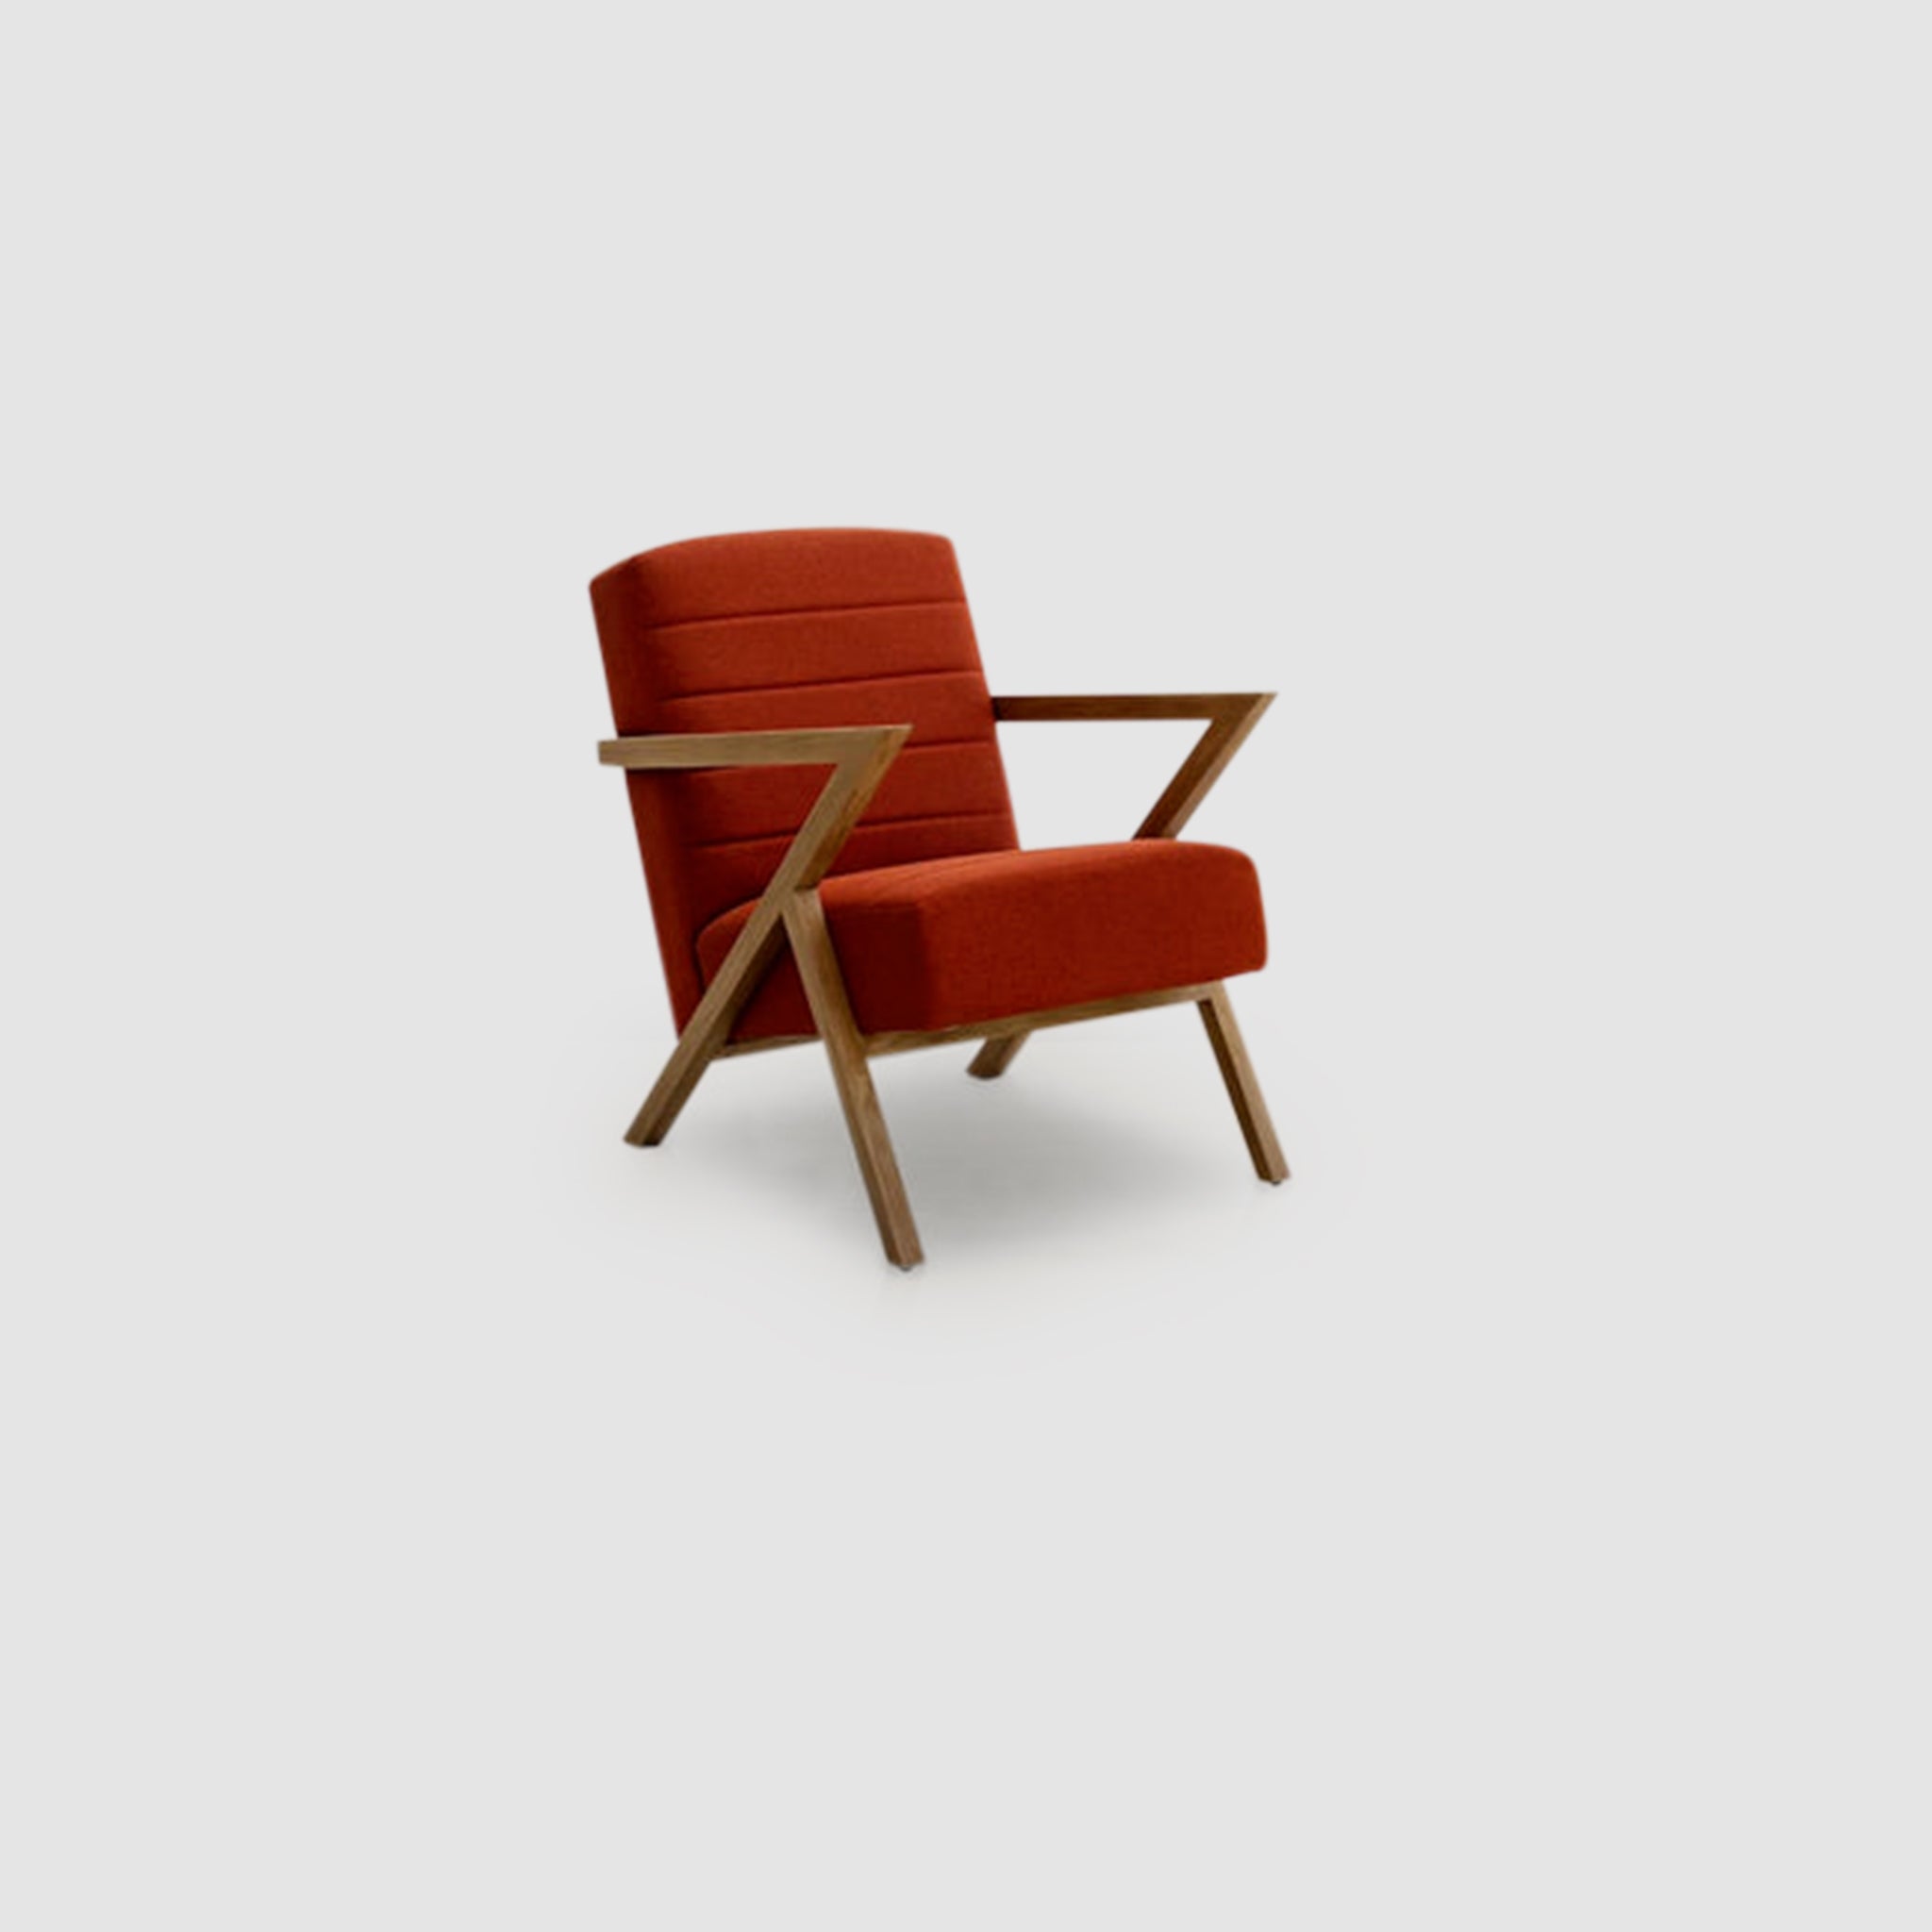 Mid-century modern Stanley accent chair with red upholstery